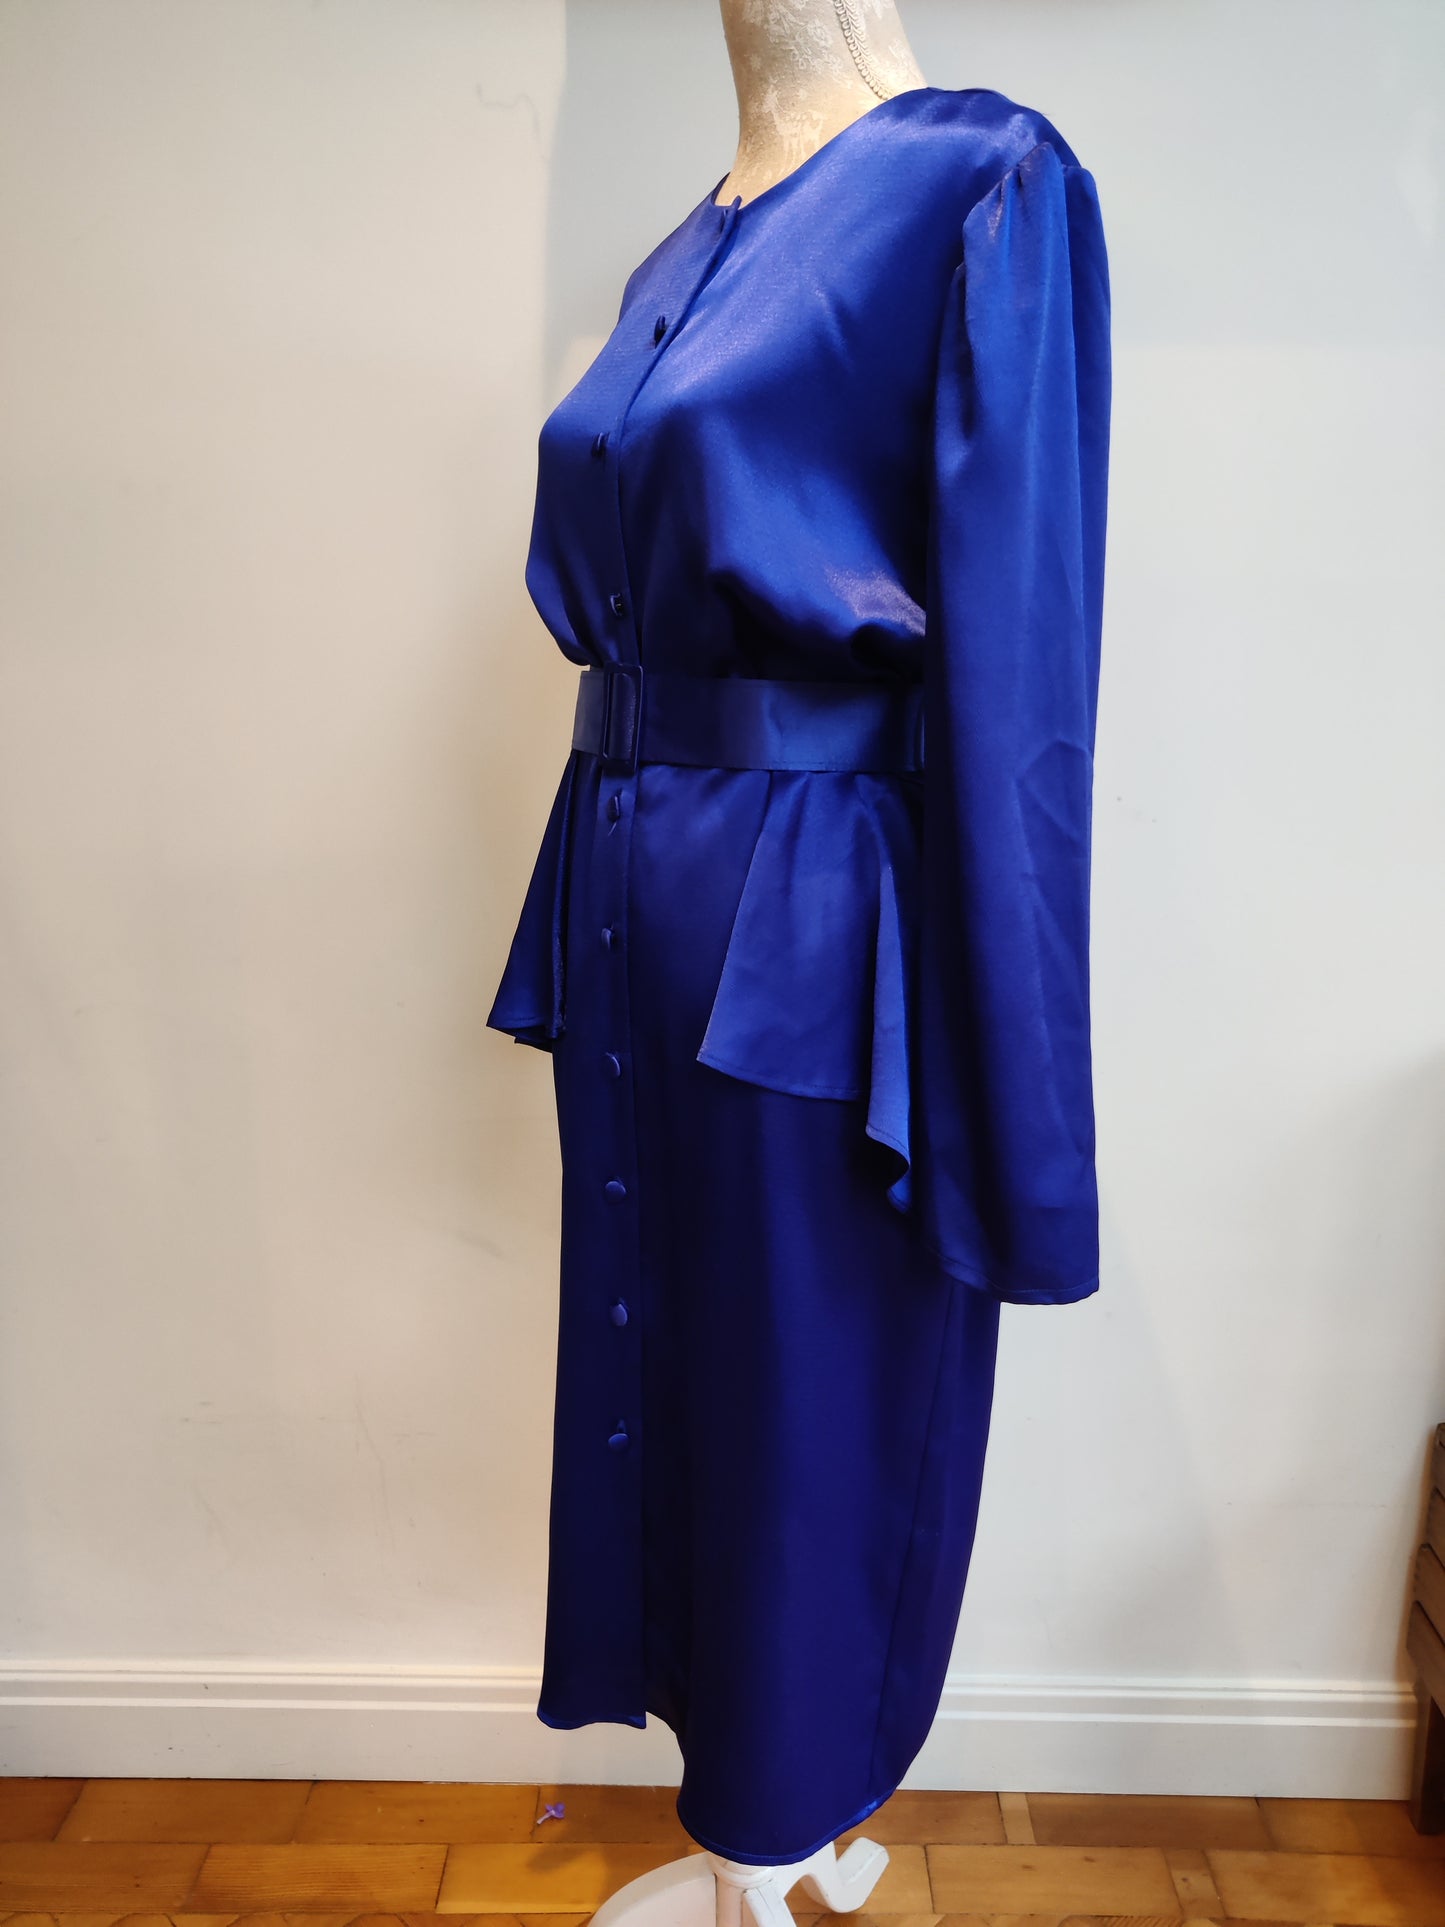 1980s electric blue evening dress with frill back. Size 12.